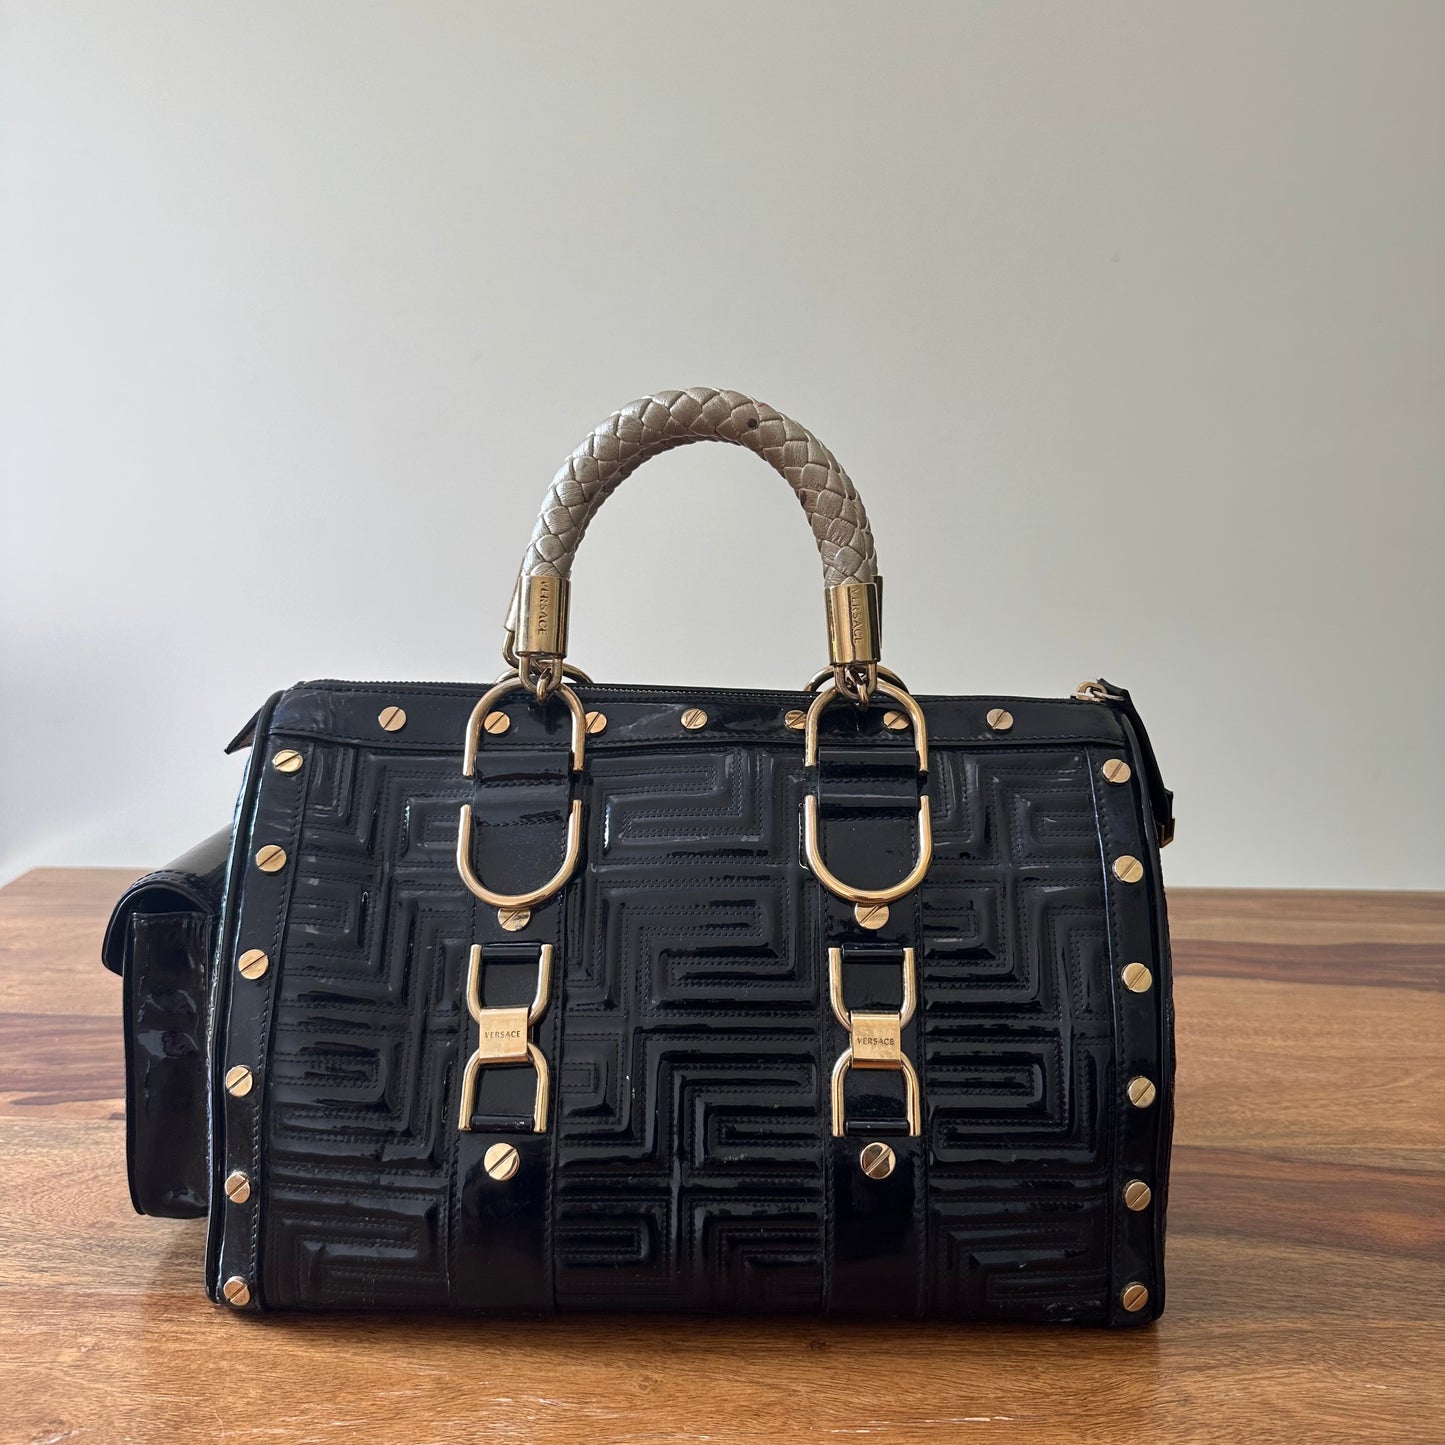 Gianni Versace Patent Leather Studded Handle Bag